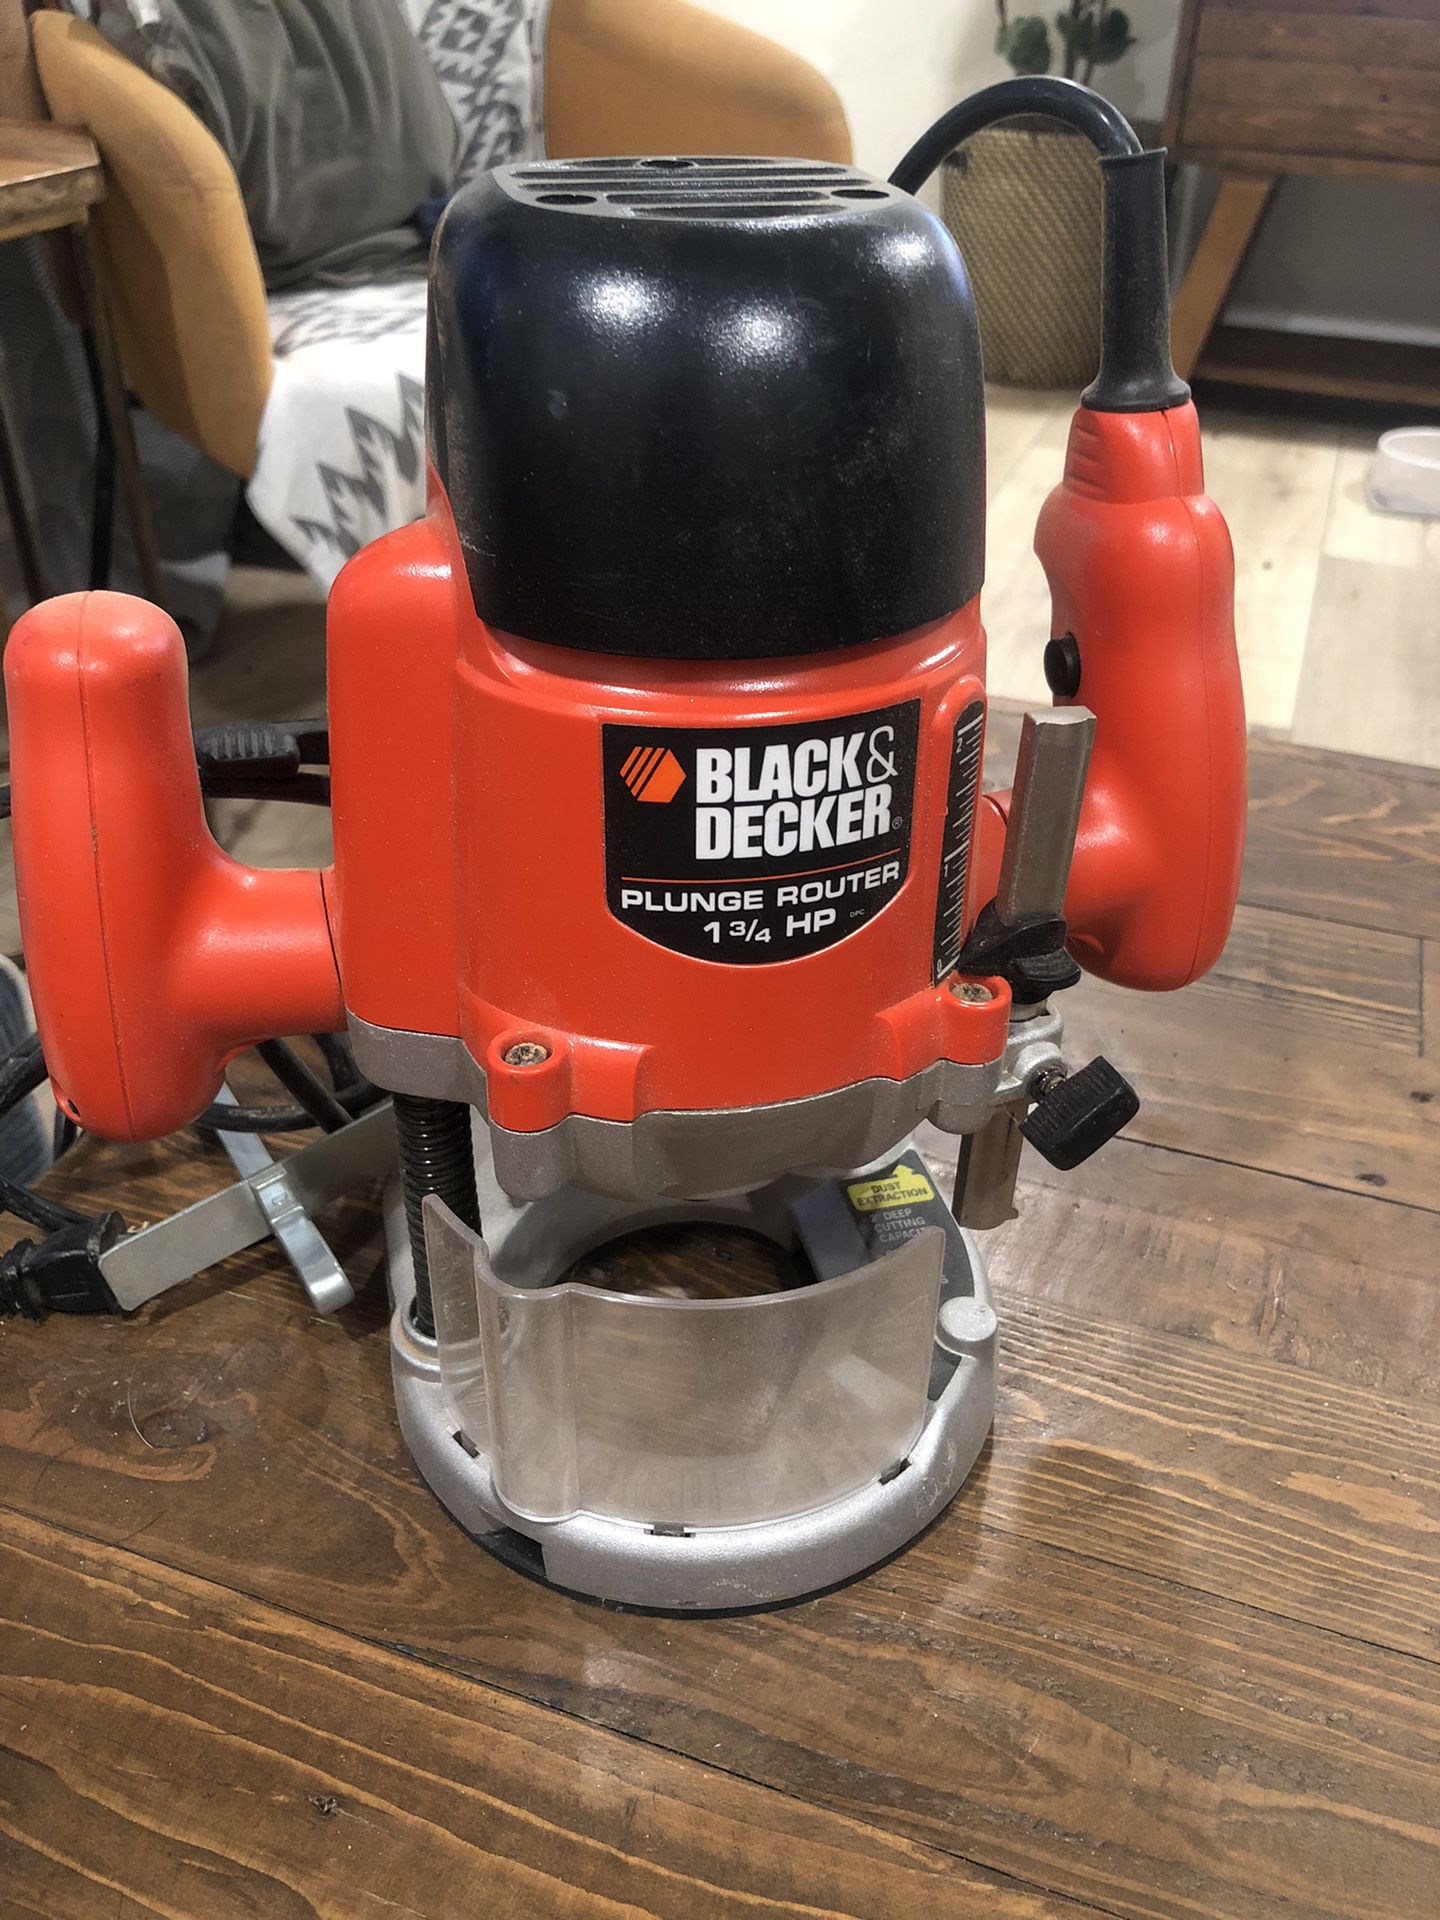 Black And Decker Plunge Router for Sale in Vista, CA - OfferUp